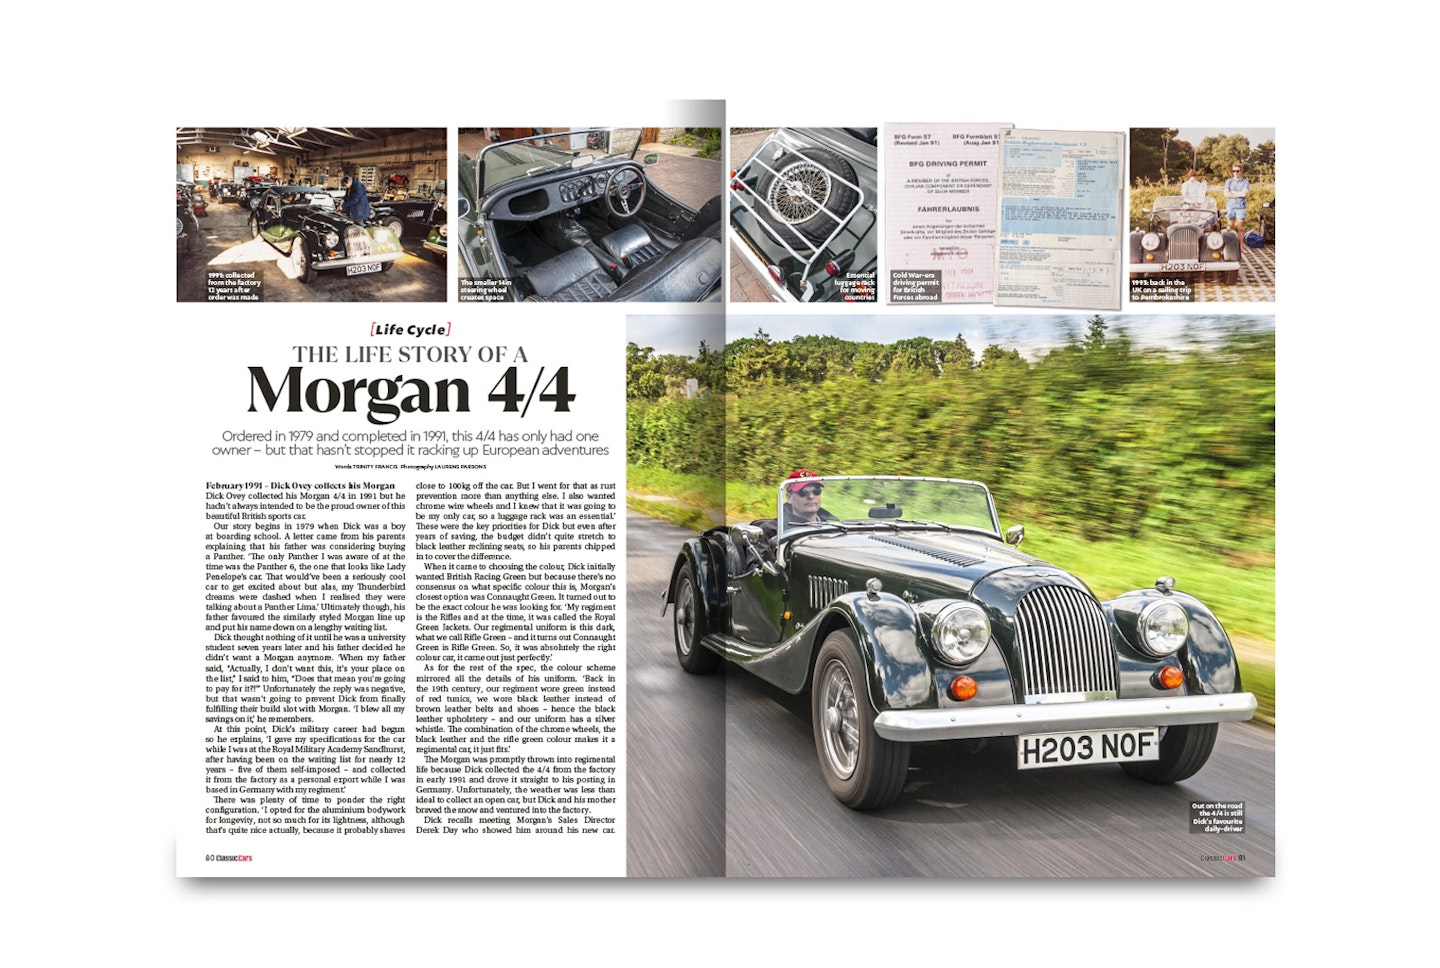 p80 Life Cycle The Morgan 4/4 that took 12 years for its first owner to collect